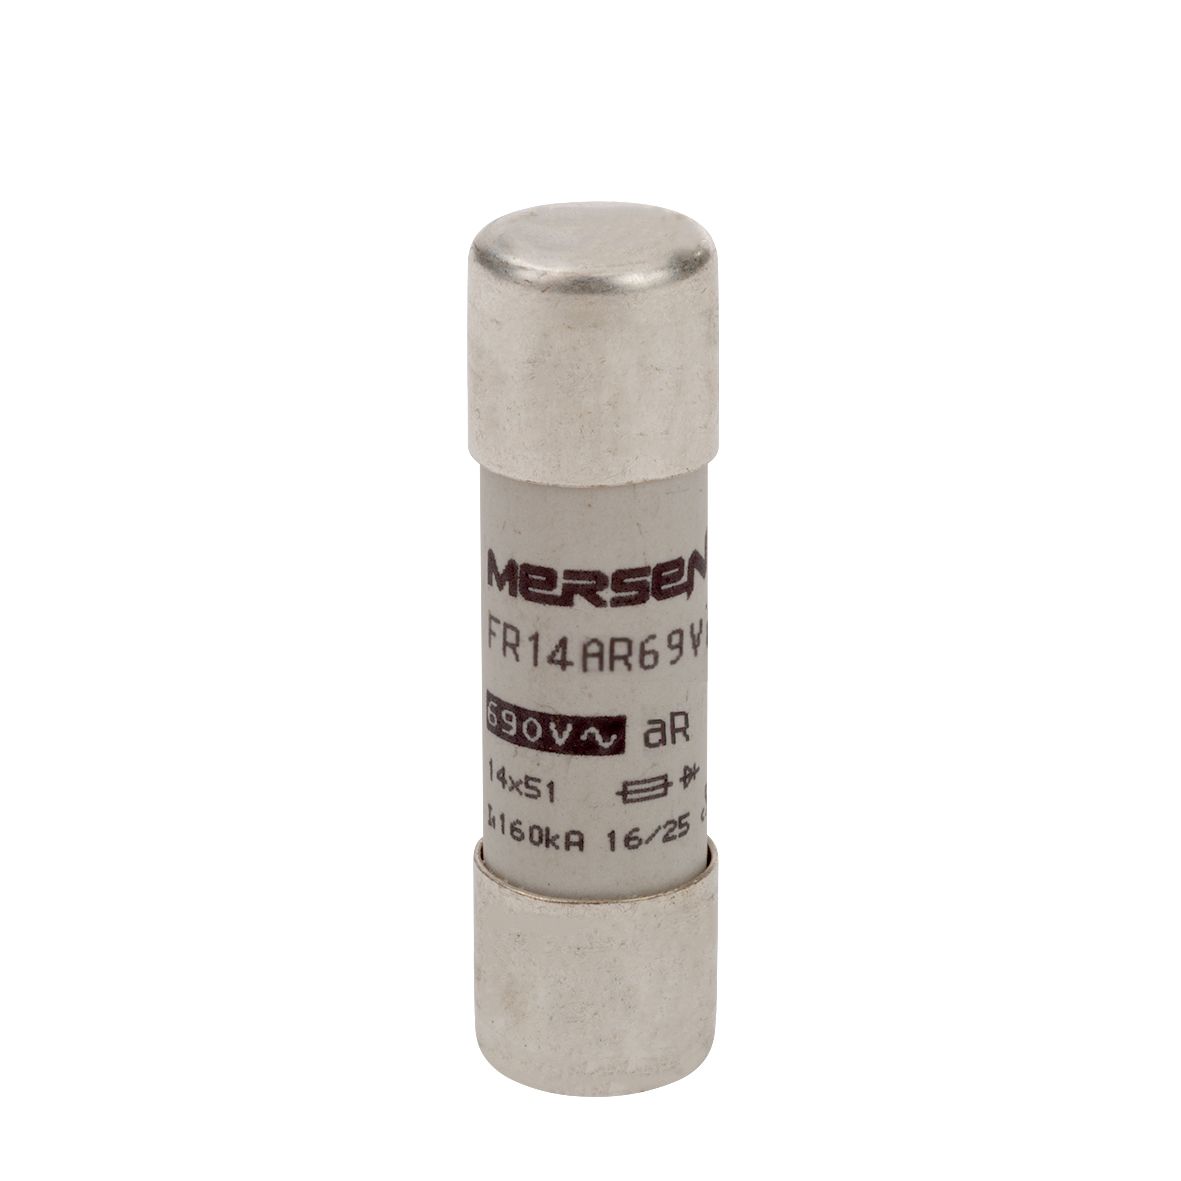 S1027334 - Cylindrical fuse-link aR 690VAC 14x51, 50A, without indicator